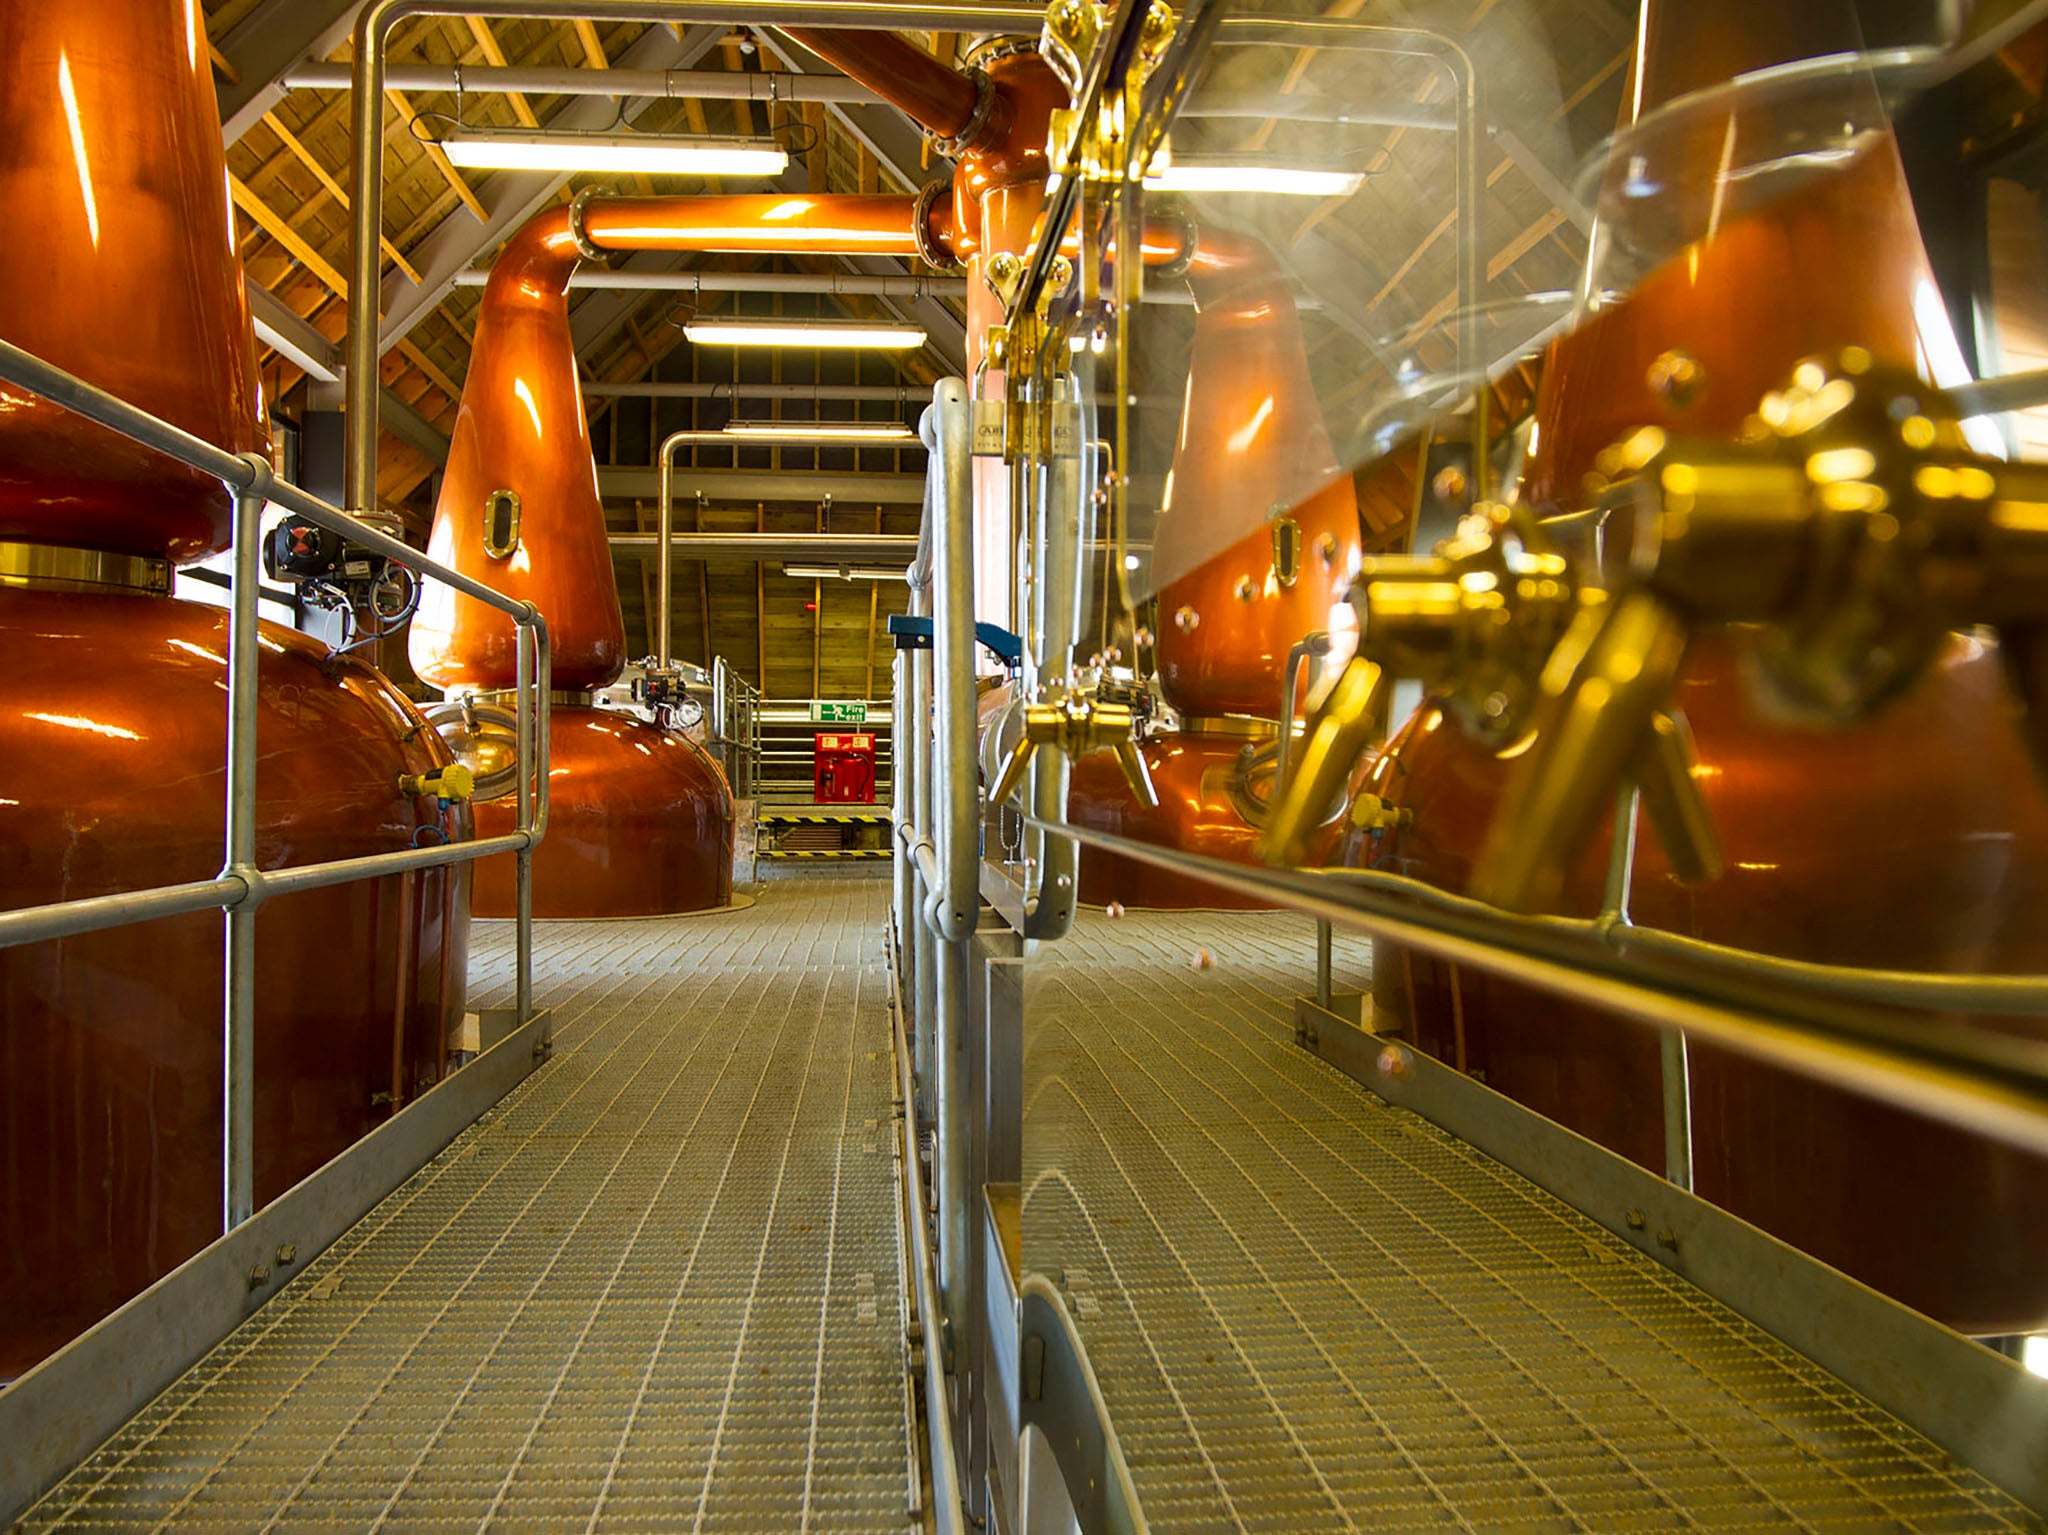 Inside the distillery in the Highlands